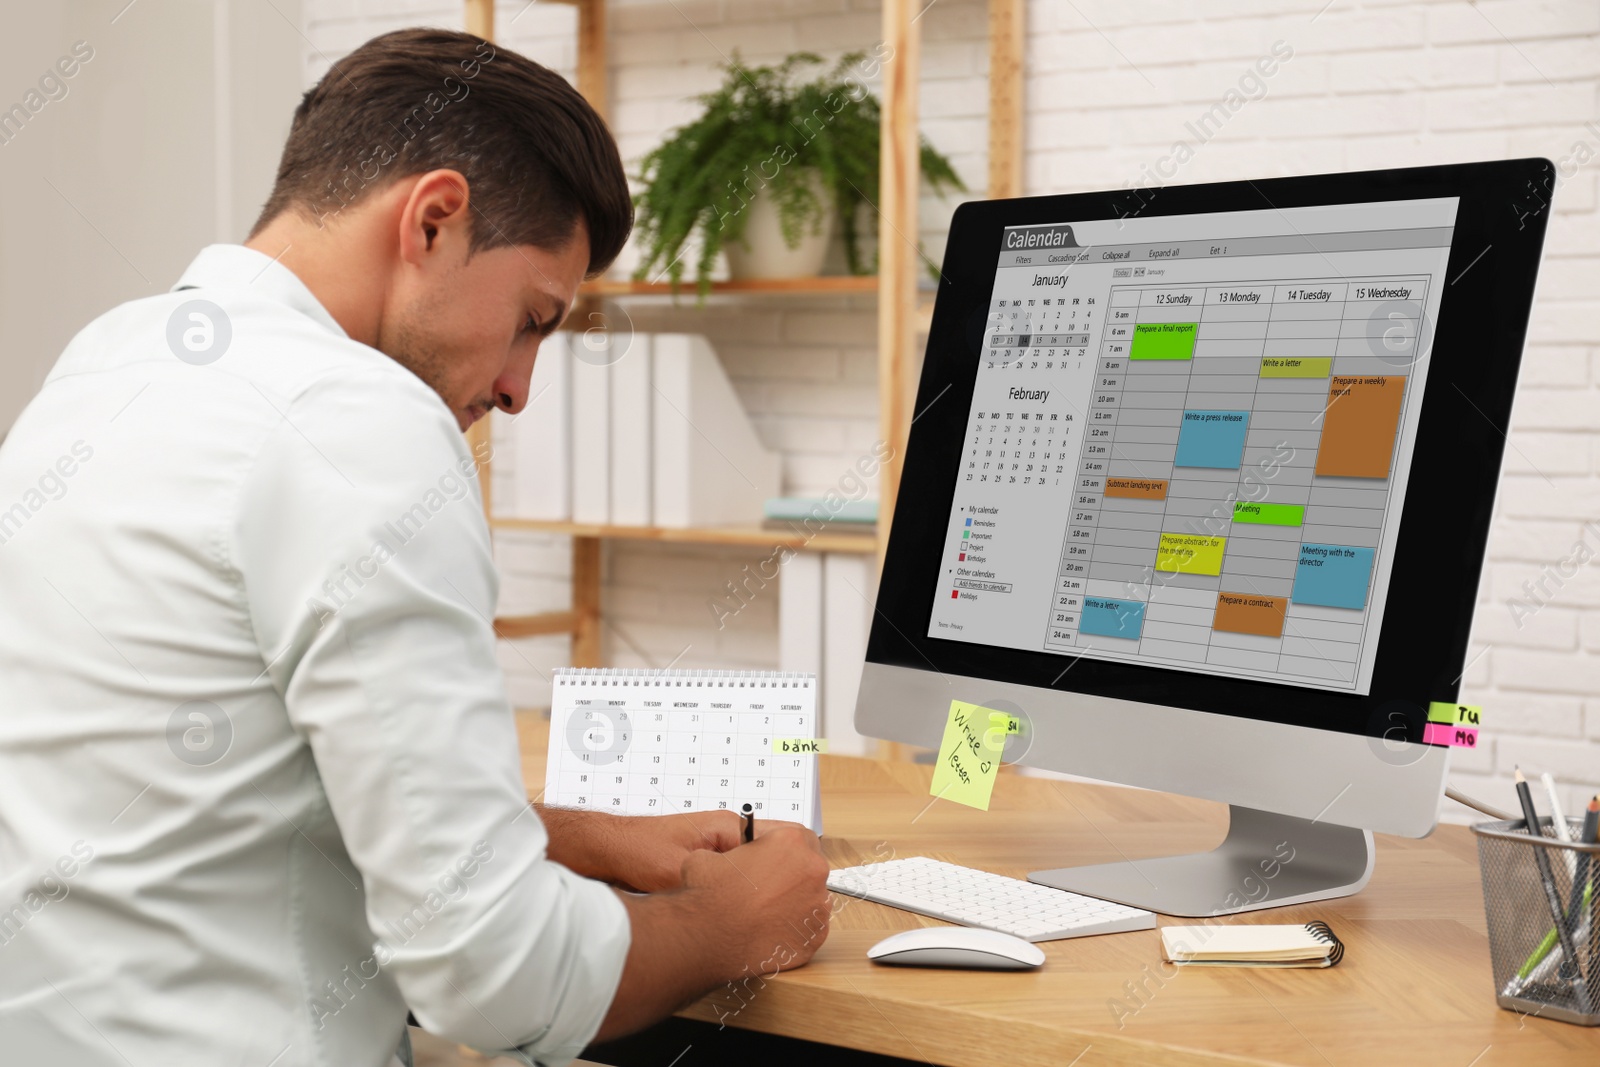 Photo of Man using calendar app on computer in office